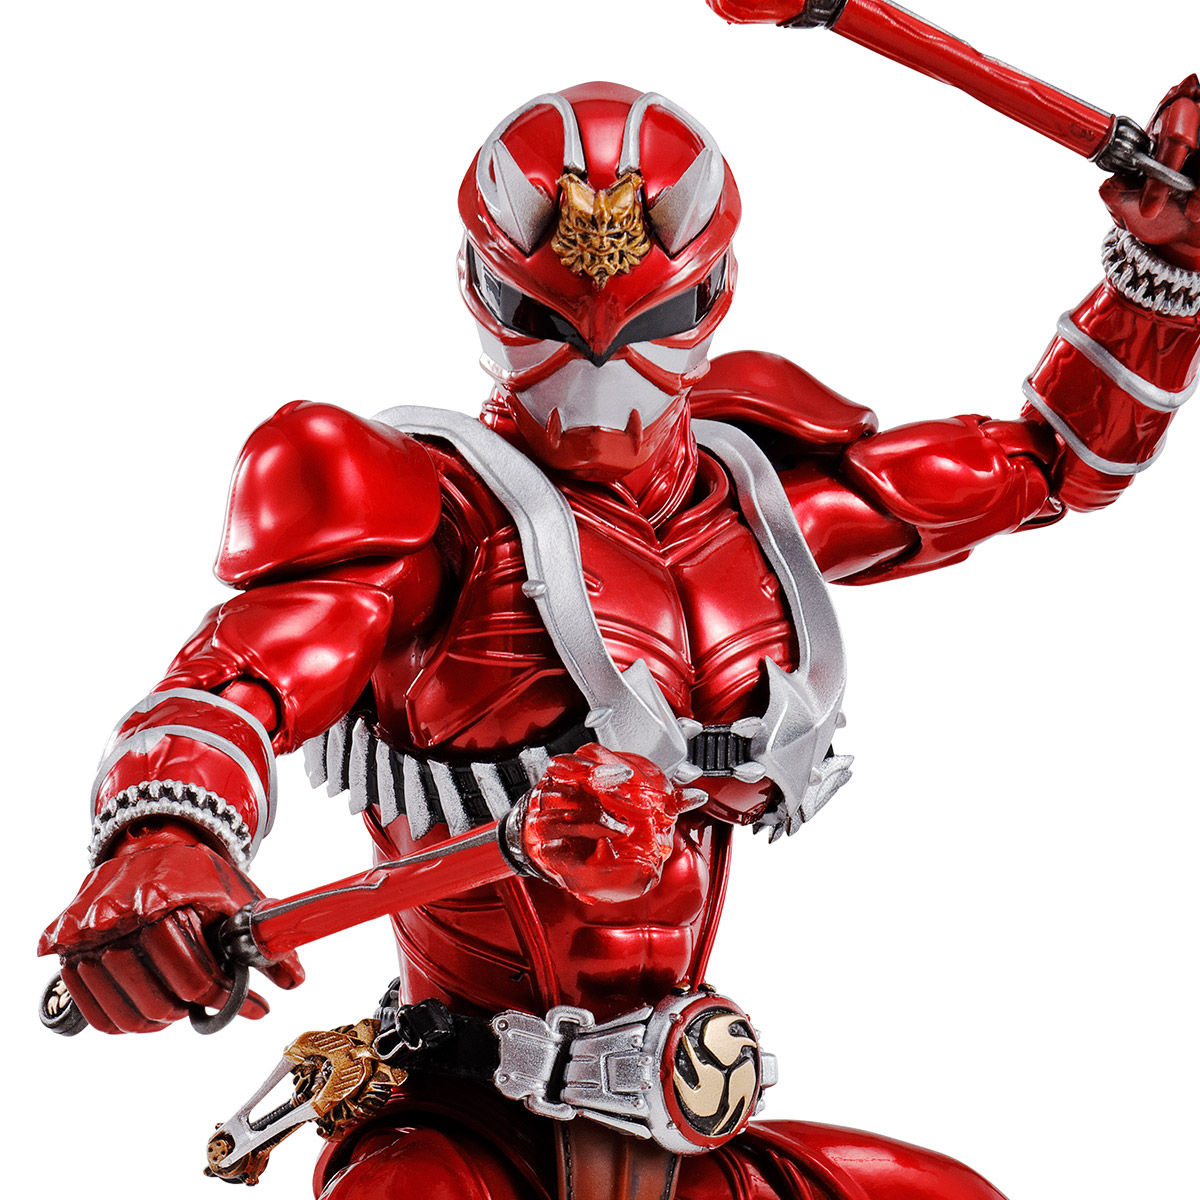 S H Figuarts 真骨彫製法 仮面ライダー響鬼紅 仮面ライダー響鬼 ヒビキ 趣味 コレクション バンダイナムコグループ公式通販サイト